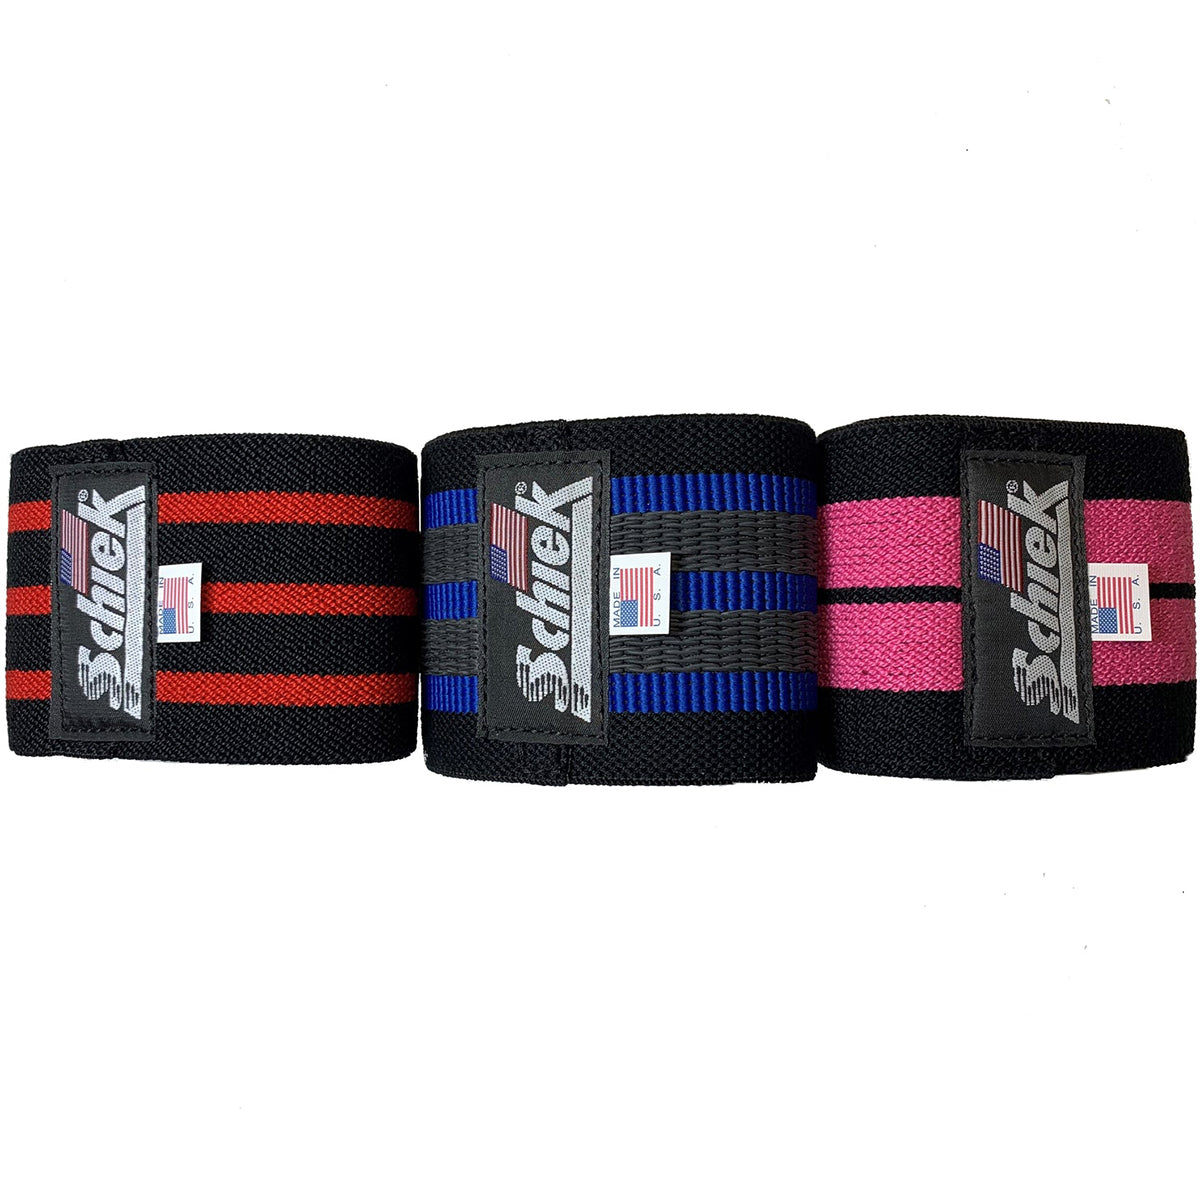 Schiek Sports Model 1180HB Fitness and Exercise Hip Bands 3-Pack Schiek Sports